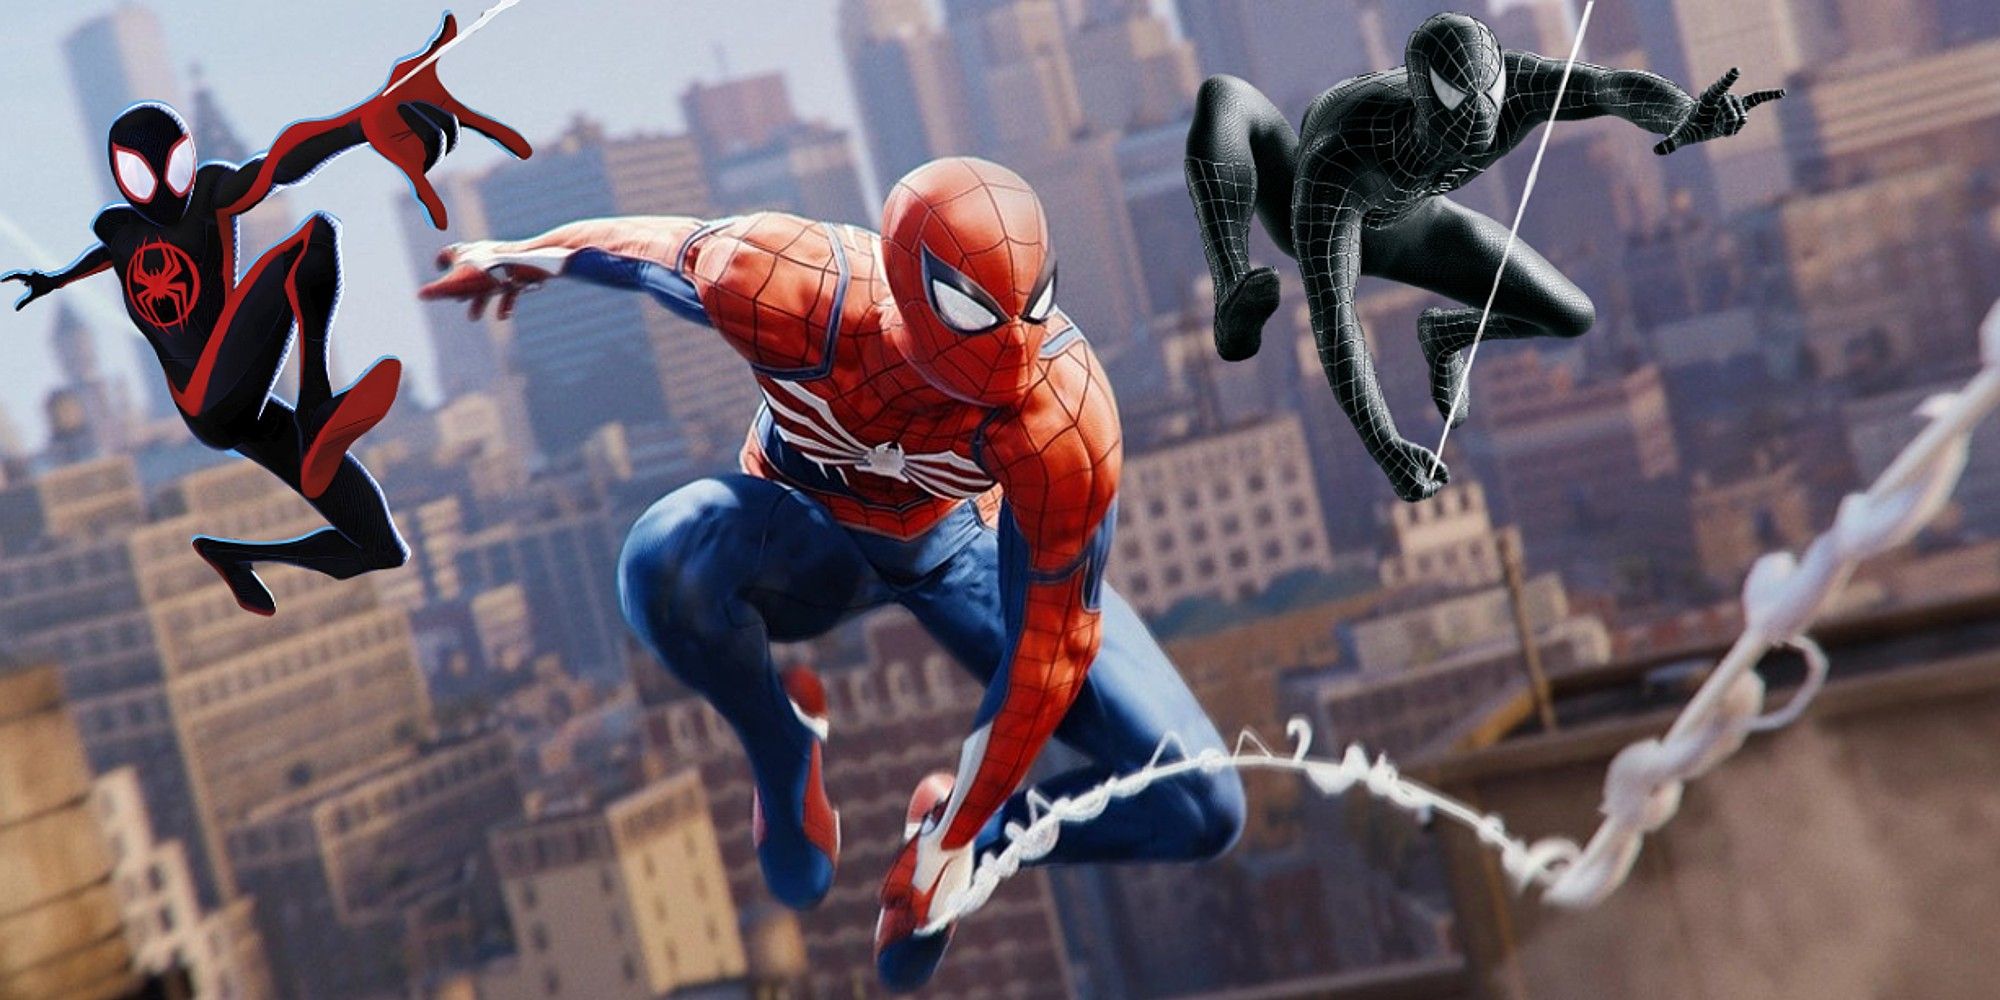 Marvel's Spider-Man 2 Peter Parker Mash-Up With Spider-Man 3's Venom Suit And Across The Spider-Verse Miles Morales